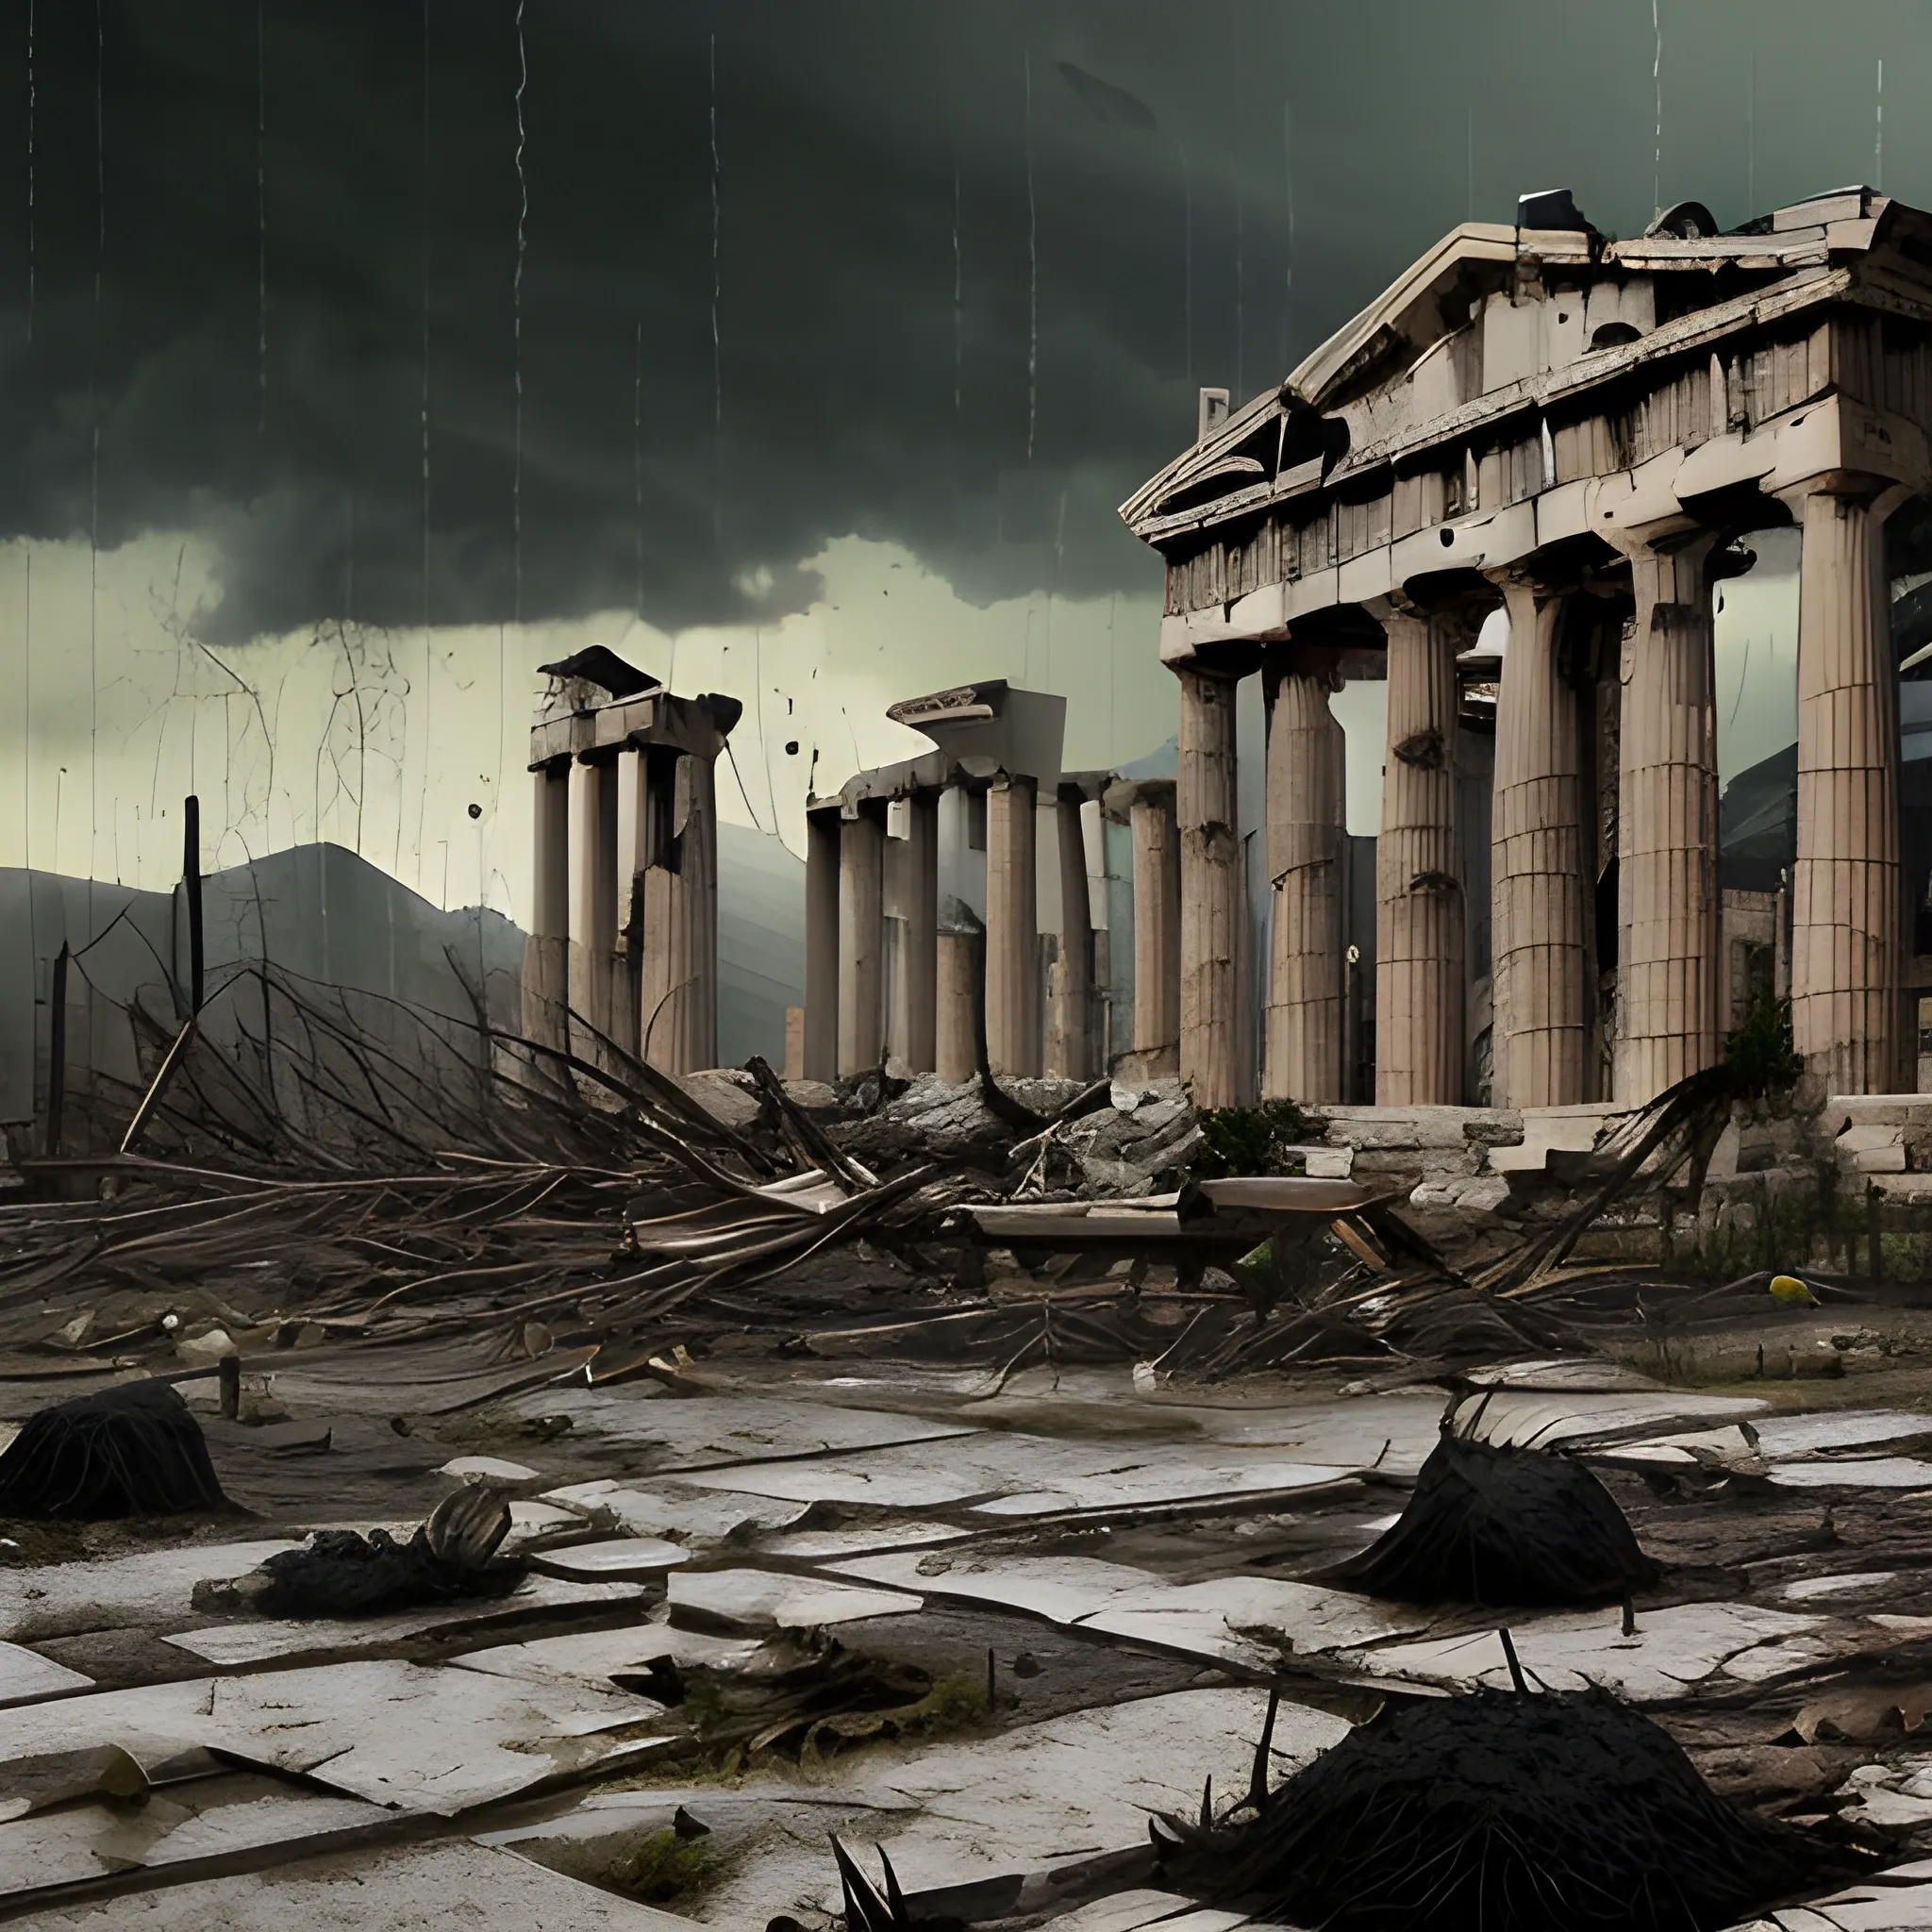 city of acropolis, on a high mountain, year 479 and 447 a. C., mountain in the heights, city in the skies, mountains, destroyed city, surrounded by clouds, gloomy environment, place of terror, dim lights, destruction, putrefaction, night, darkness, dead vegetation, moor, rotten fauna, dry trees , burned grass, dead grass, sterile plants, burned trees, rain, rainy weather, storm, strong storm, wind raising sand, rainy environment, thunder, lightning, dim lights, water falling from the sky, terror, dark moon, darkness, ruins, destroyed, death, ancient greek architectural details, detailed environment, hyper realistic, destroyed city, decay, corroded construction, destroyed, rubble in the streets, destroyed houses, corpses, 8k details, wide angle, 3D, panoramic view, slasher style